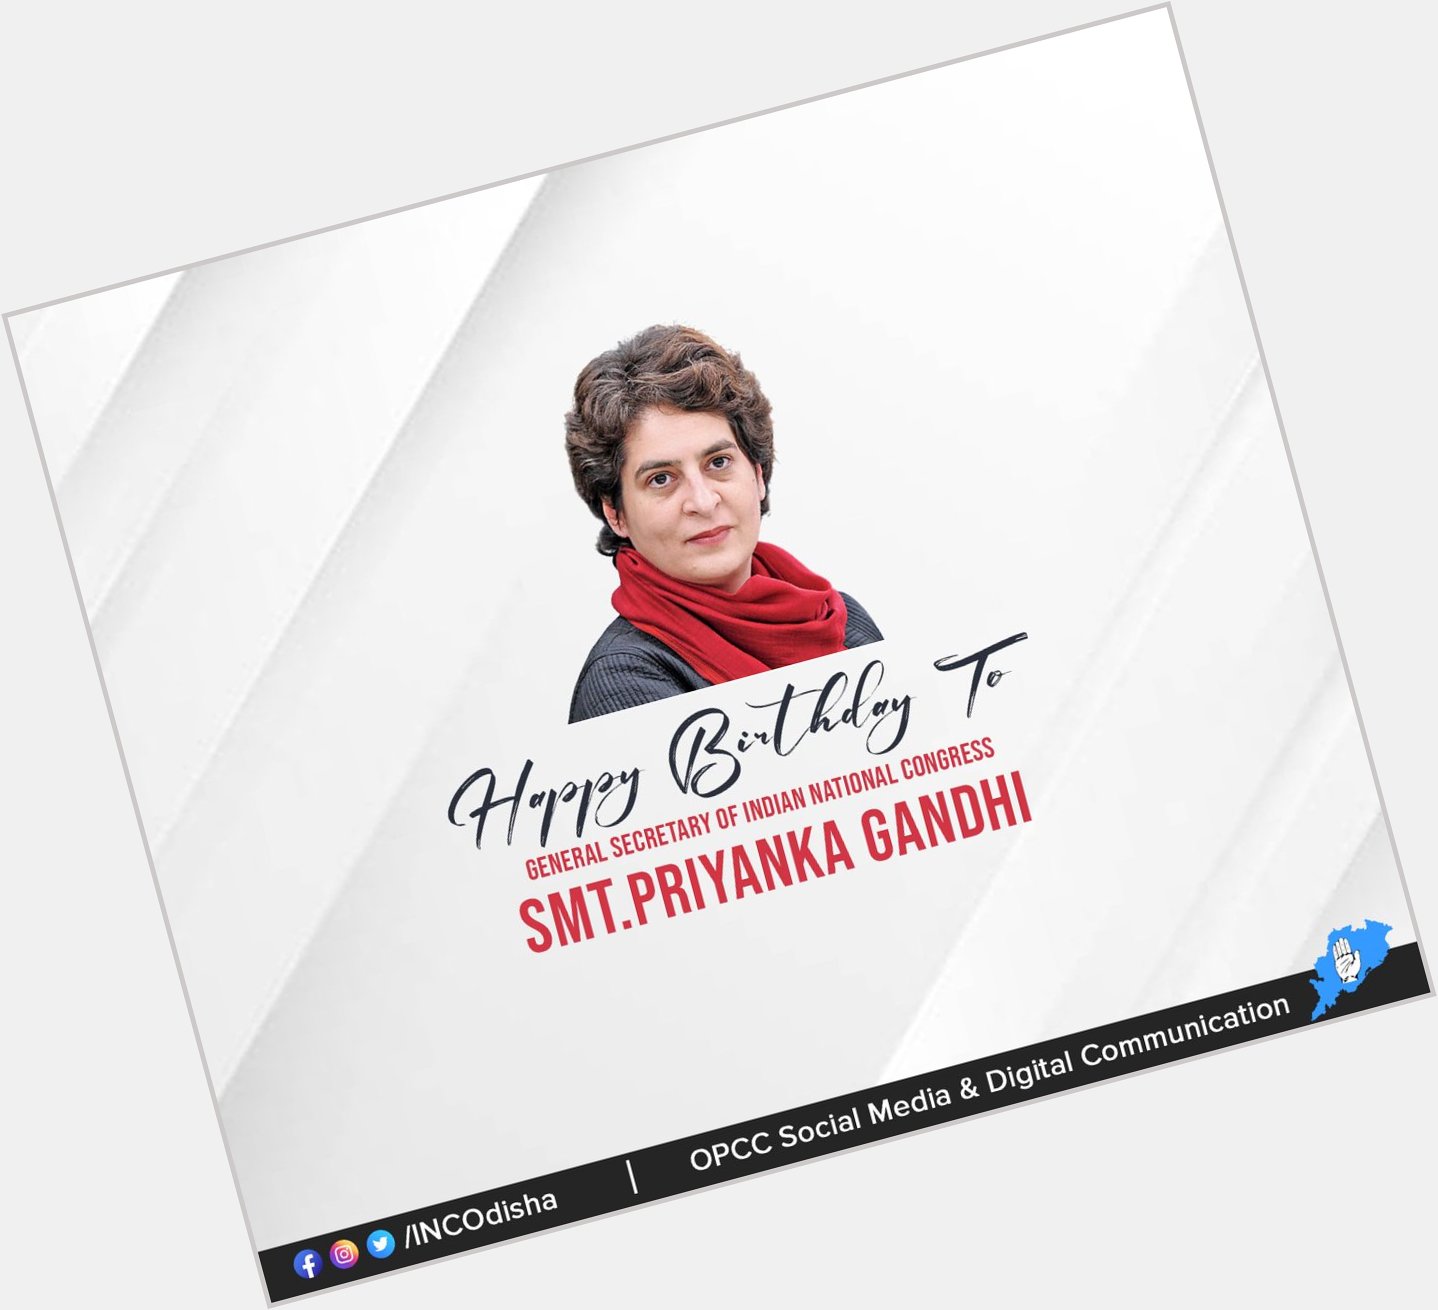 Wishing a very happy birthday to Smt. Priyanka Gandhi. May the almighty bless her with a long & healthy life! 